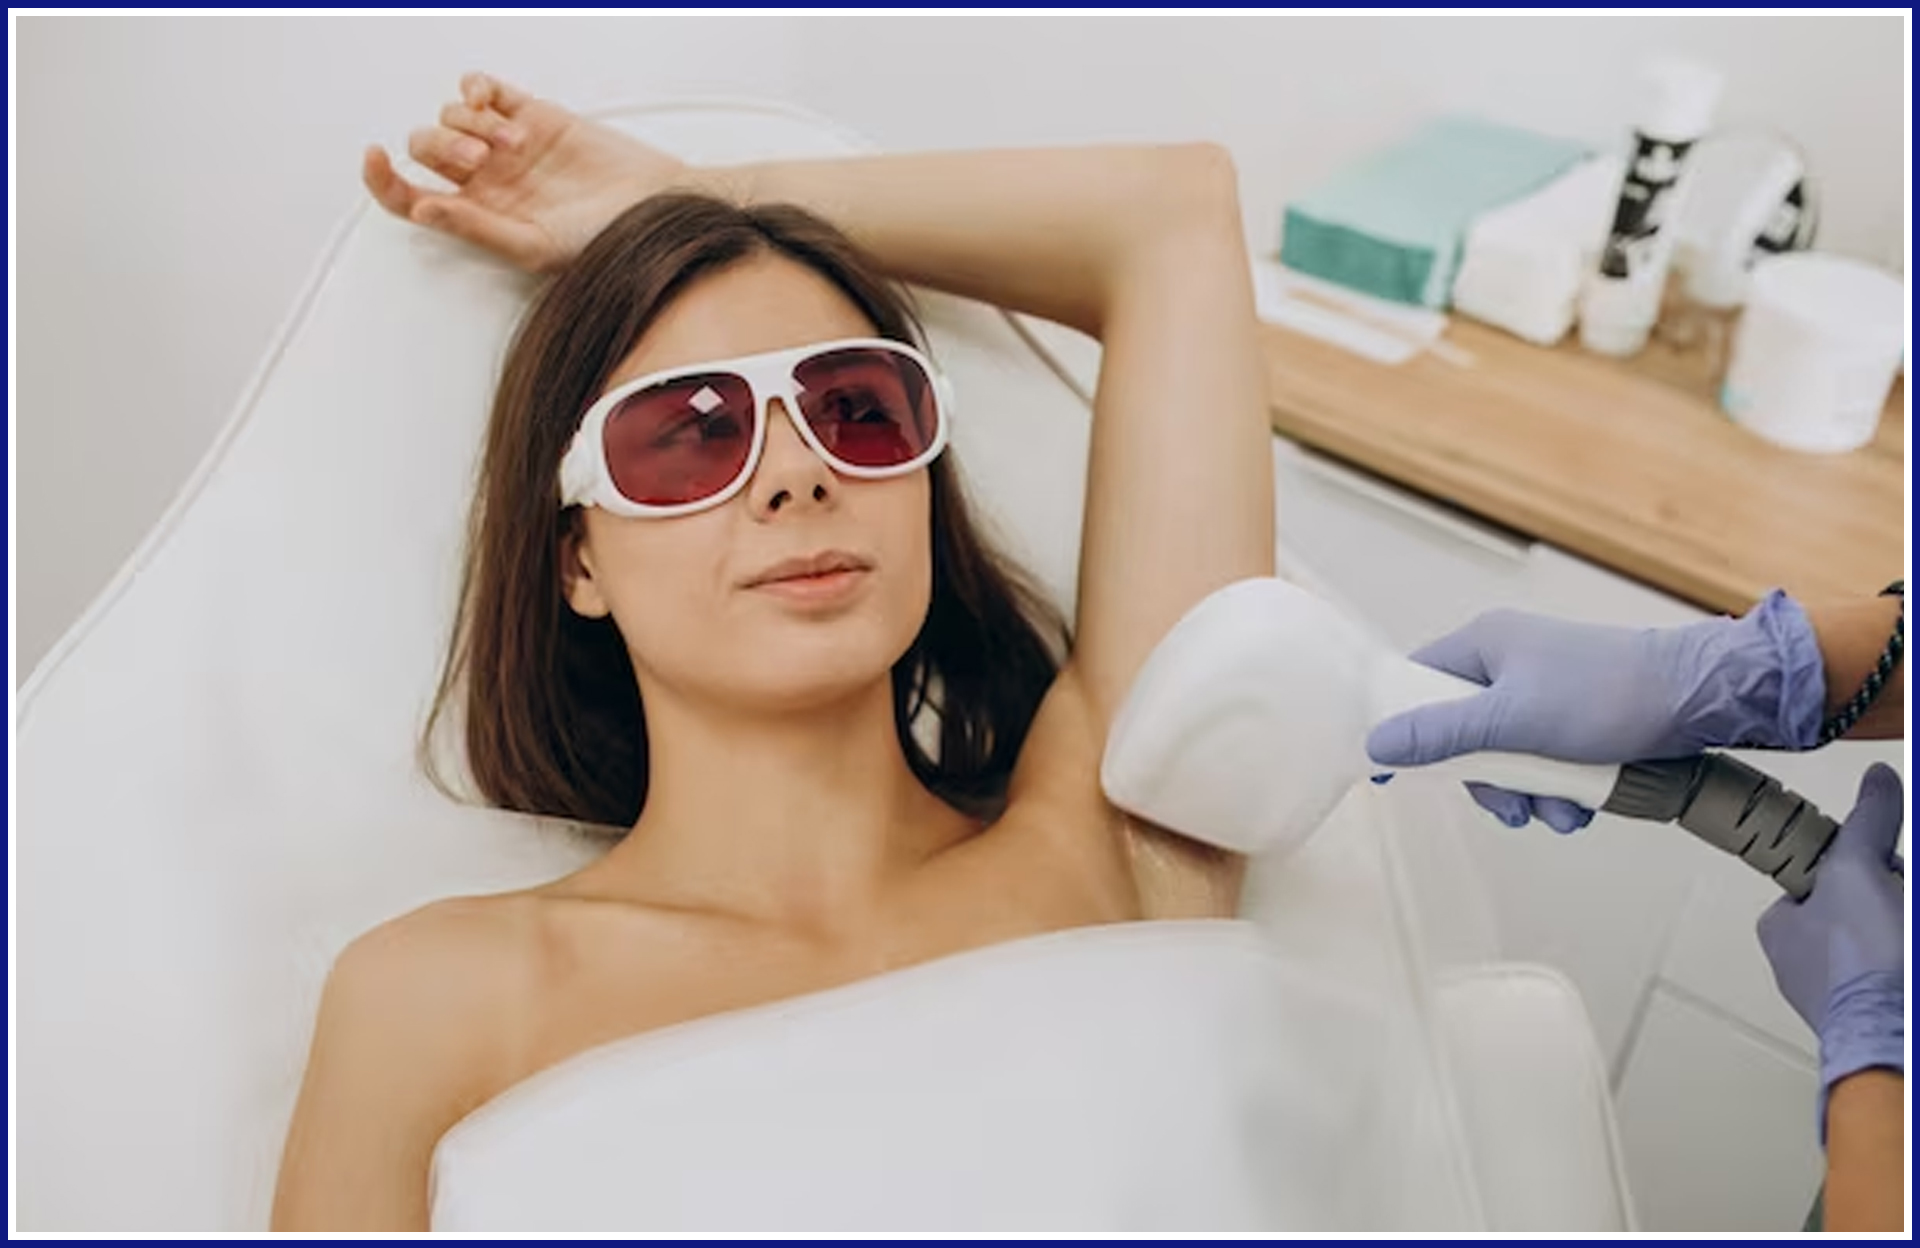 What are the Benefits of SEA HEART Diode Laser Hair Removal Machine?